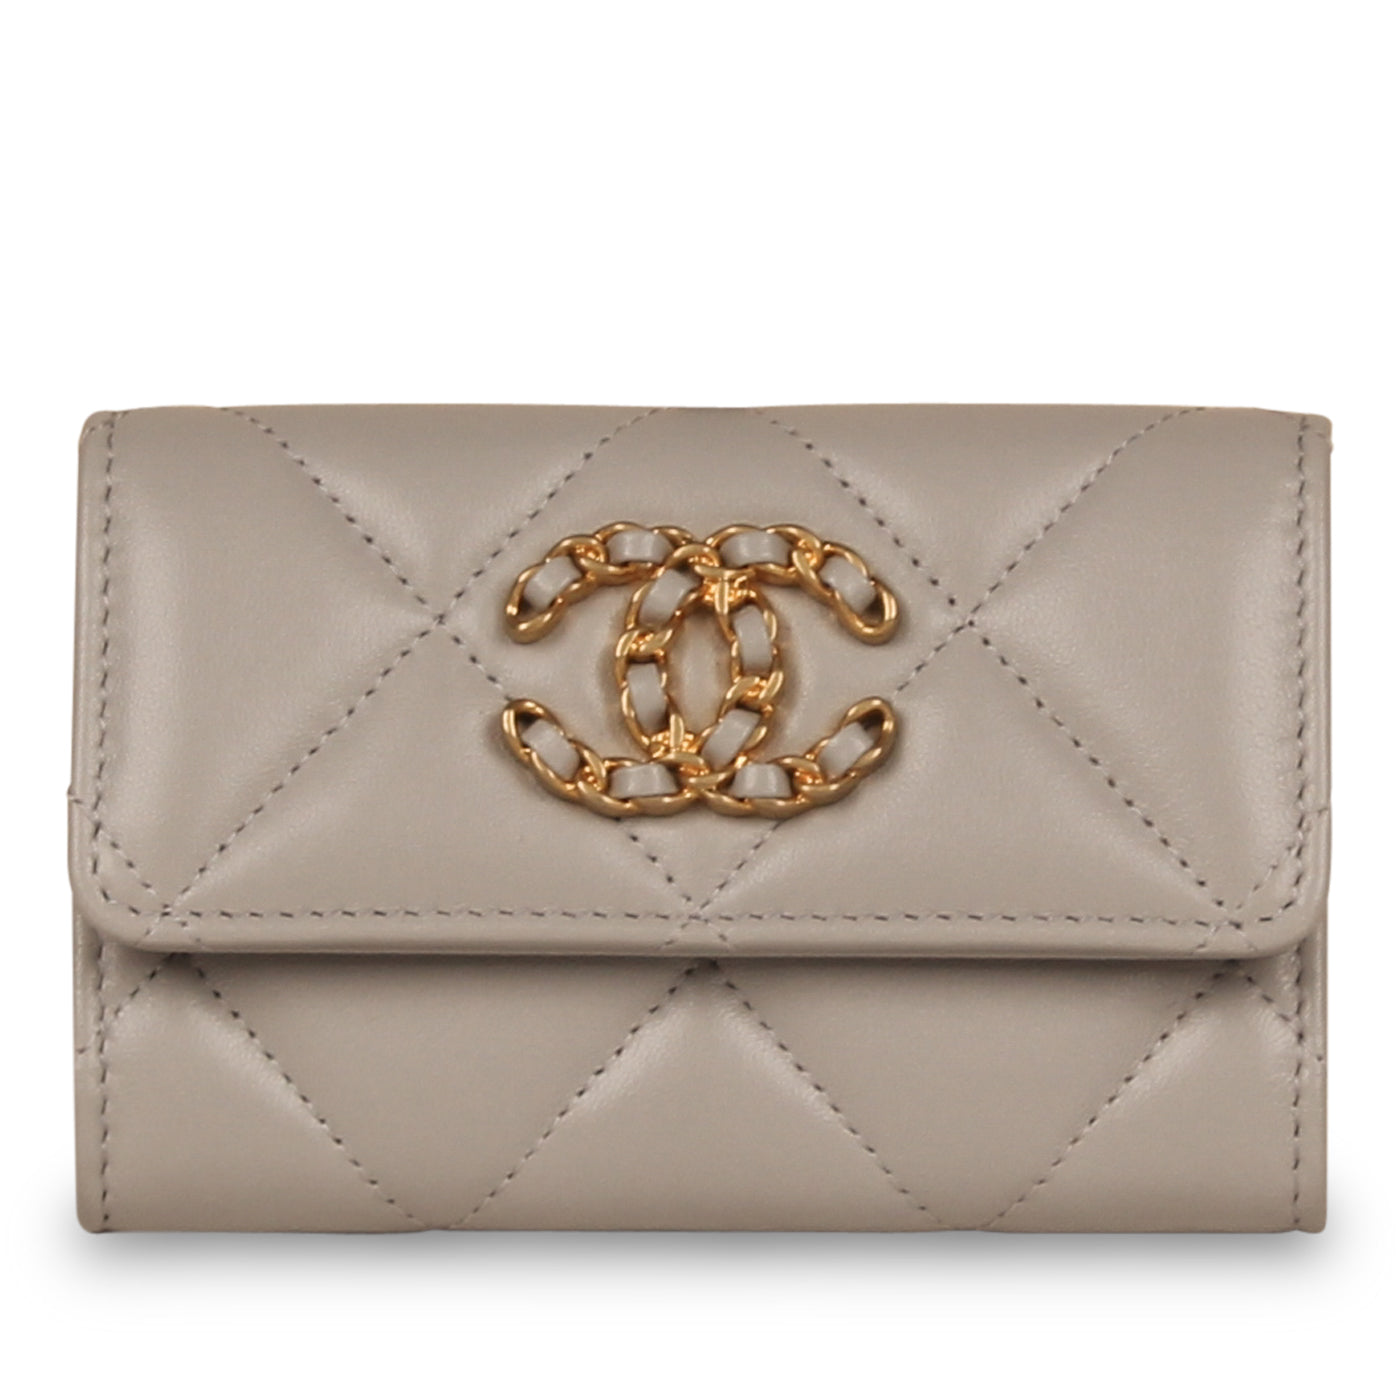 CHANEL Shiny Goatskin Quilted Chanel 19 Flap Card Holder Beige